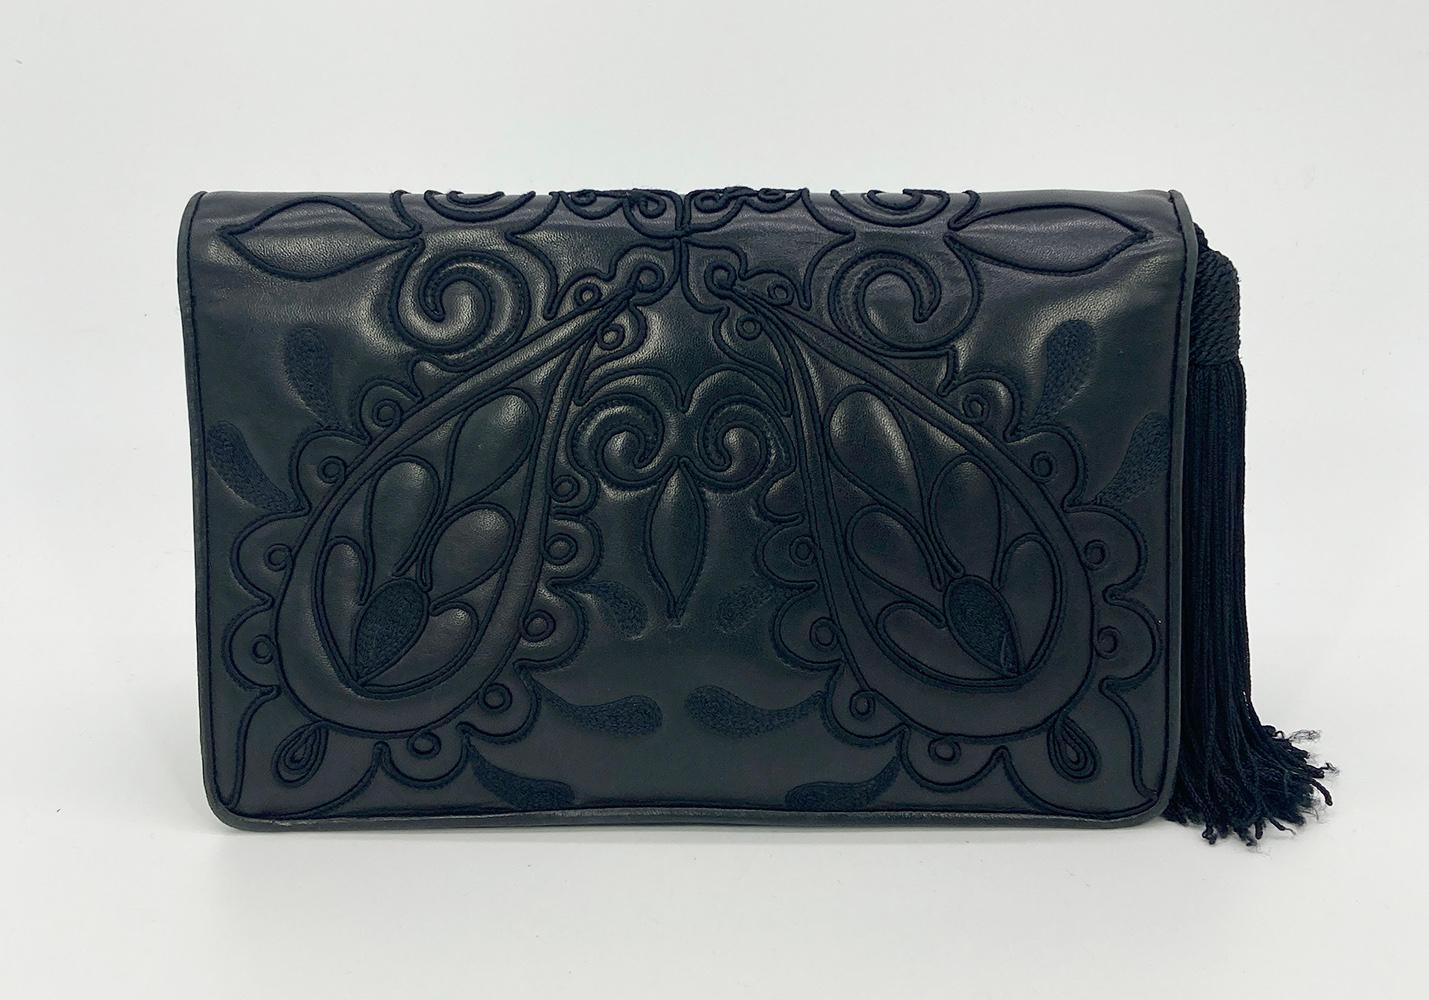 Judith Leiber Black Embroidered Leather Tassel Clutch  In Good Condition For Sale In Philadelphia, PA